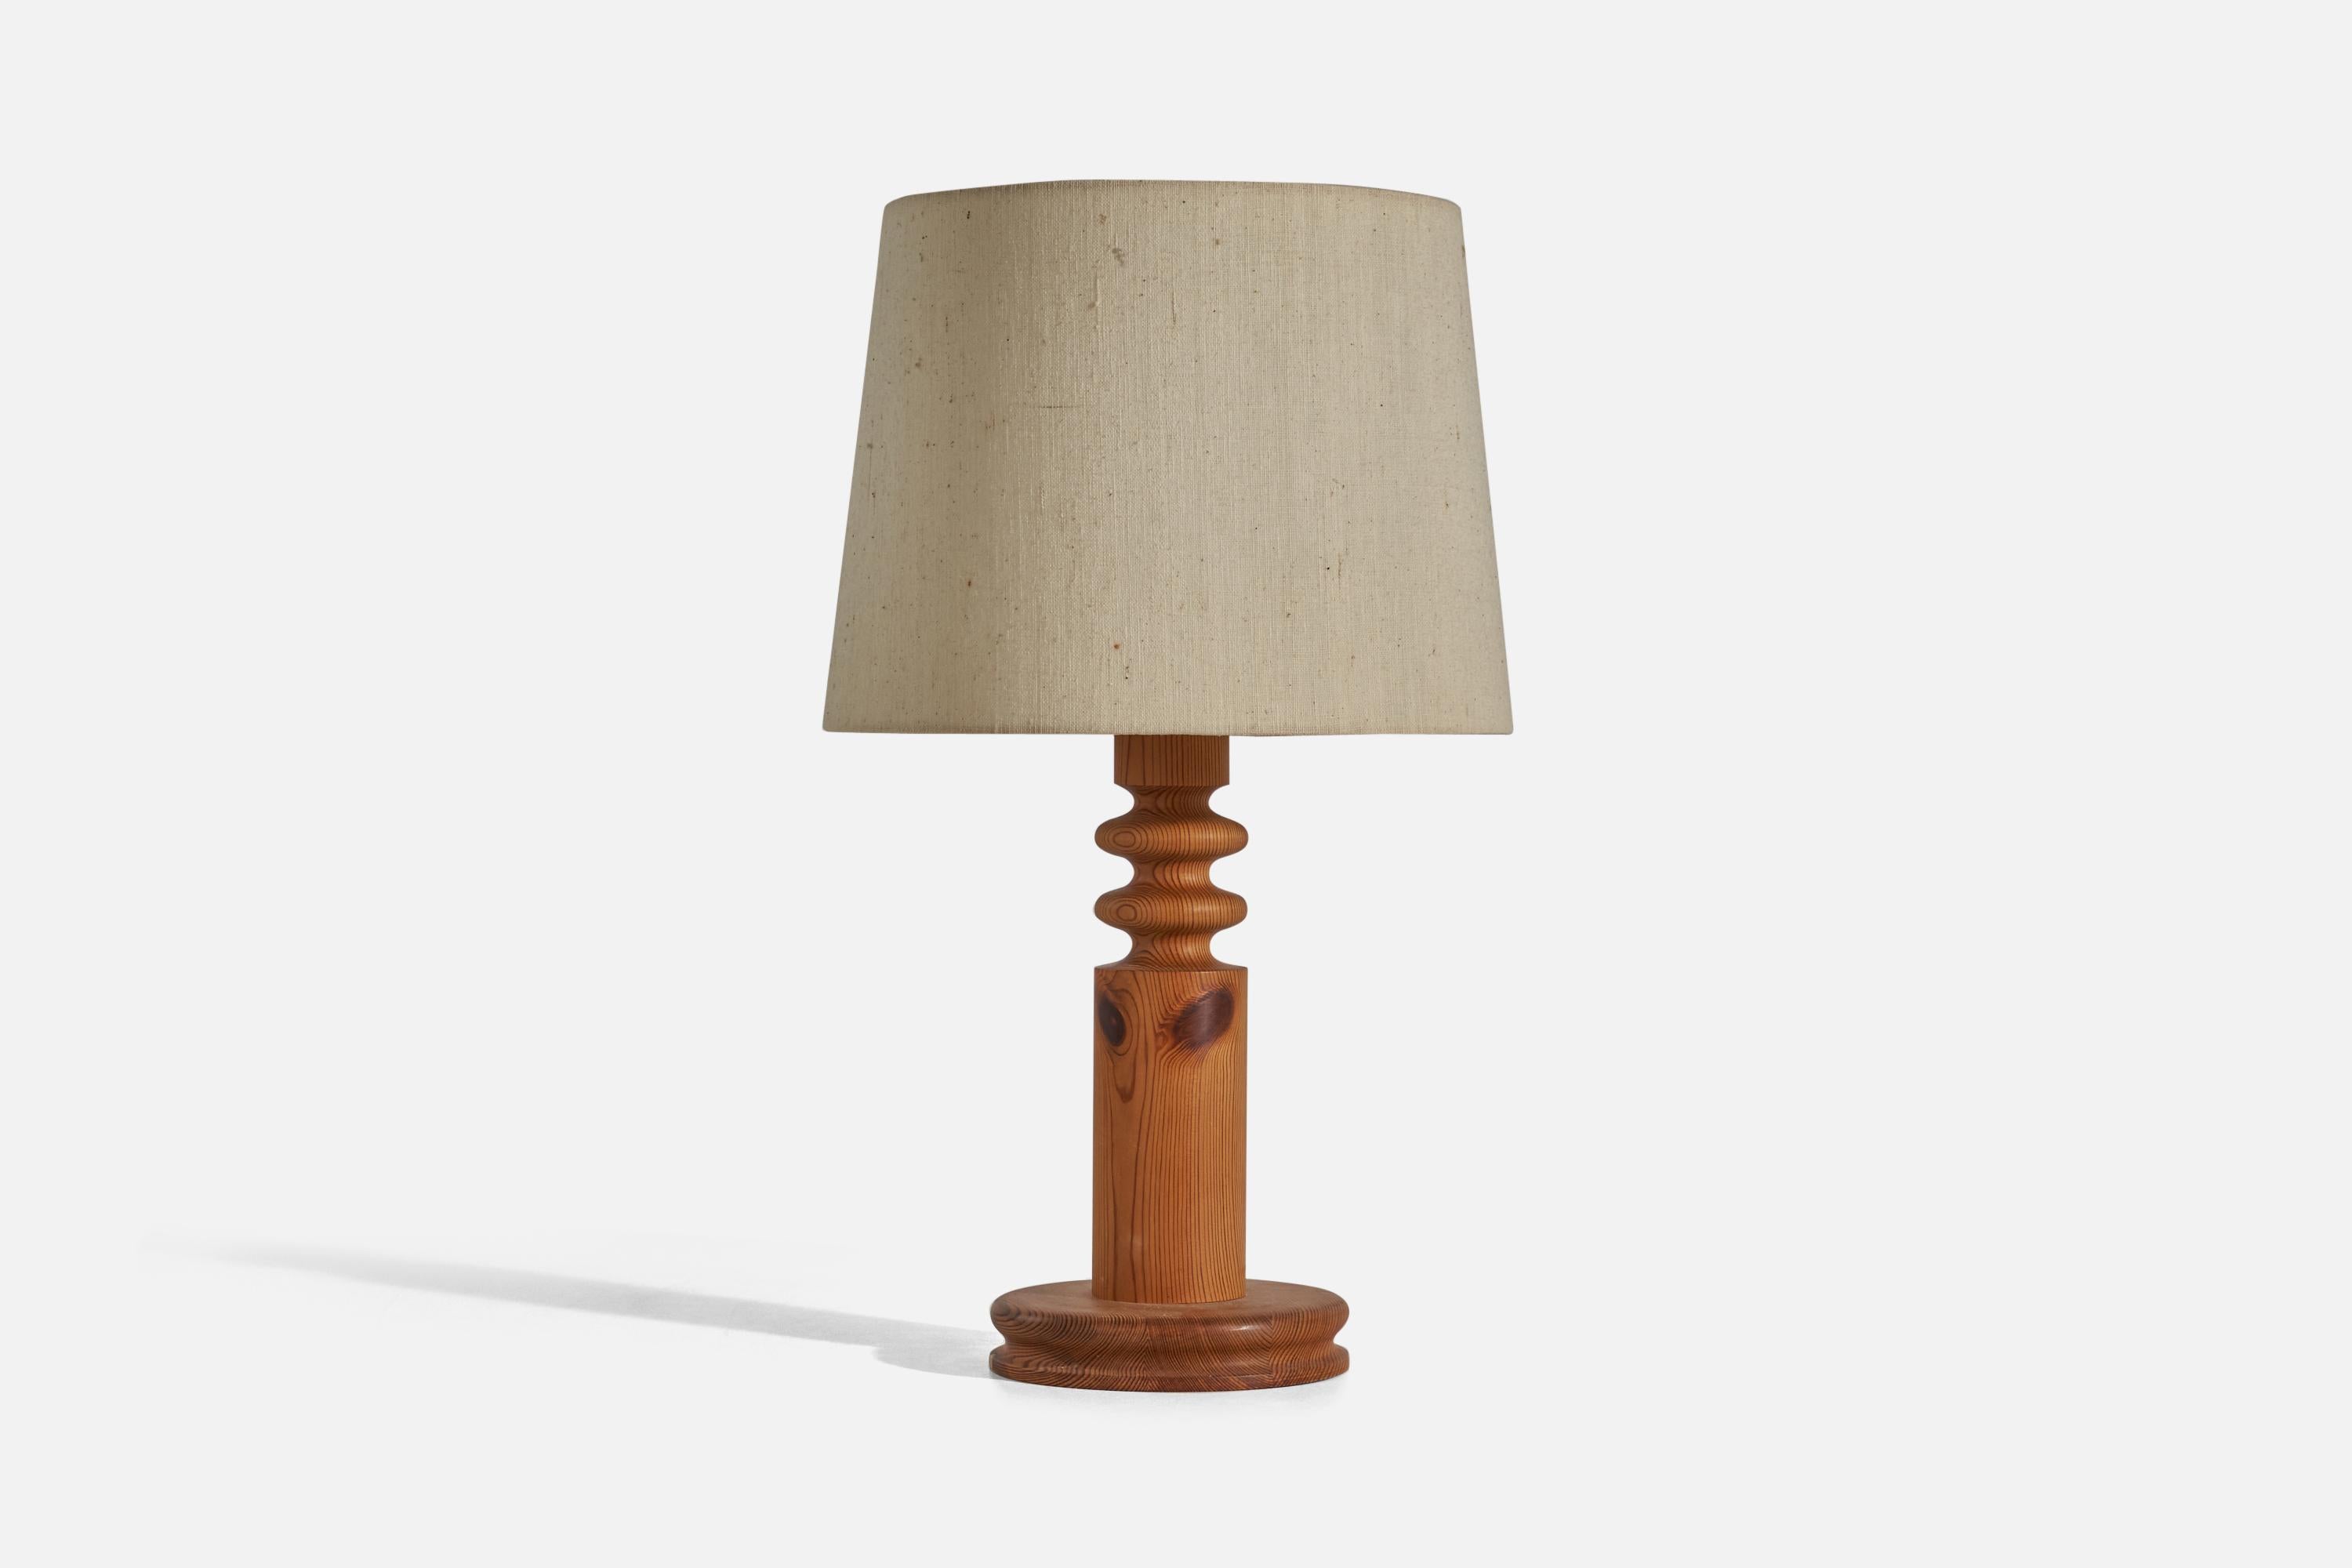 A solid pine and beige fabric table lamp designed by Uno Kristiansson and produced by Luxus, Sweden, 1960s.

Sold with Lampshade. Dimensions stated are of Table Lamp with Lampshade. 

Socket takes standard E-26 medium base bulb.

There is no maximum